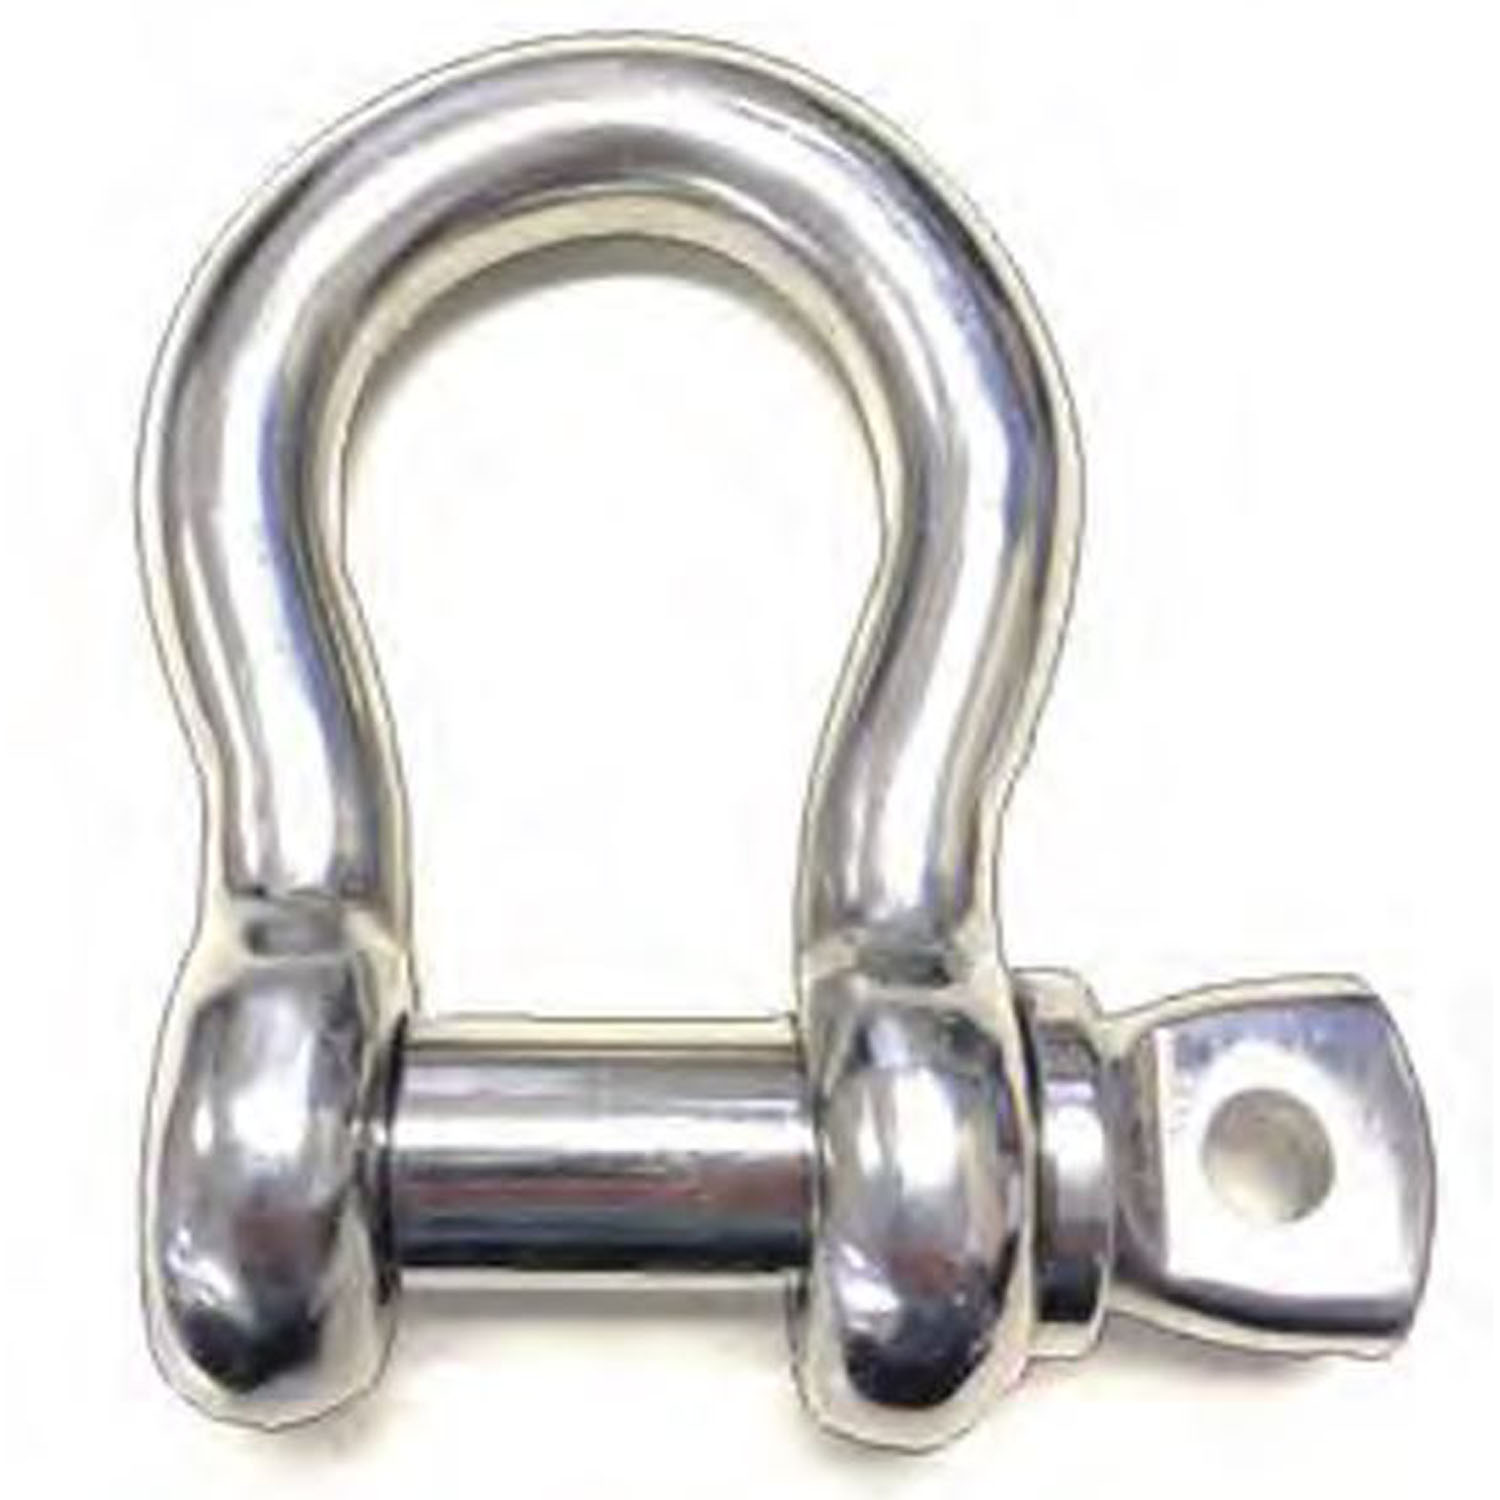 UPSET FORGED PIN ANCHOR SHACKLE (MULTIPLE SIZES AVAILABLE)